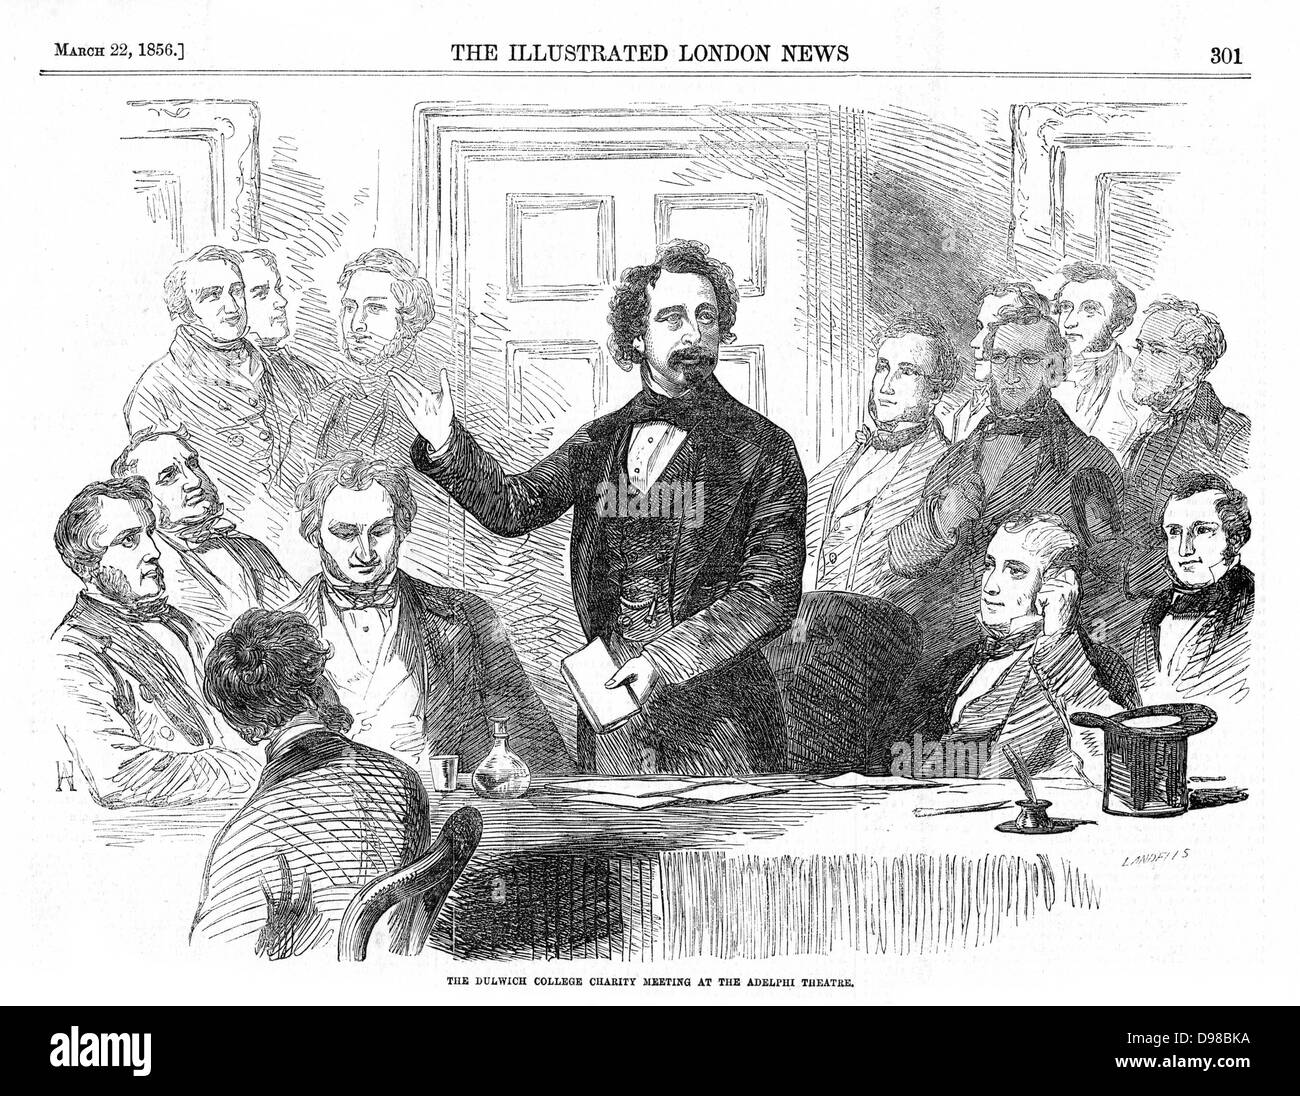 Charles Dickens (1812-70) English novelist and journalist speaking at a Dulwich College Charity meeting. From 'The llustrated London News, 22 March 1856. Stock Photo